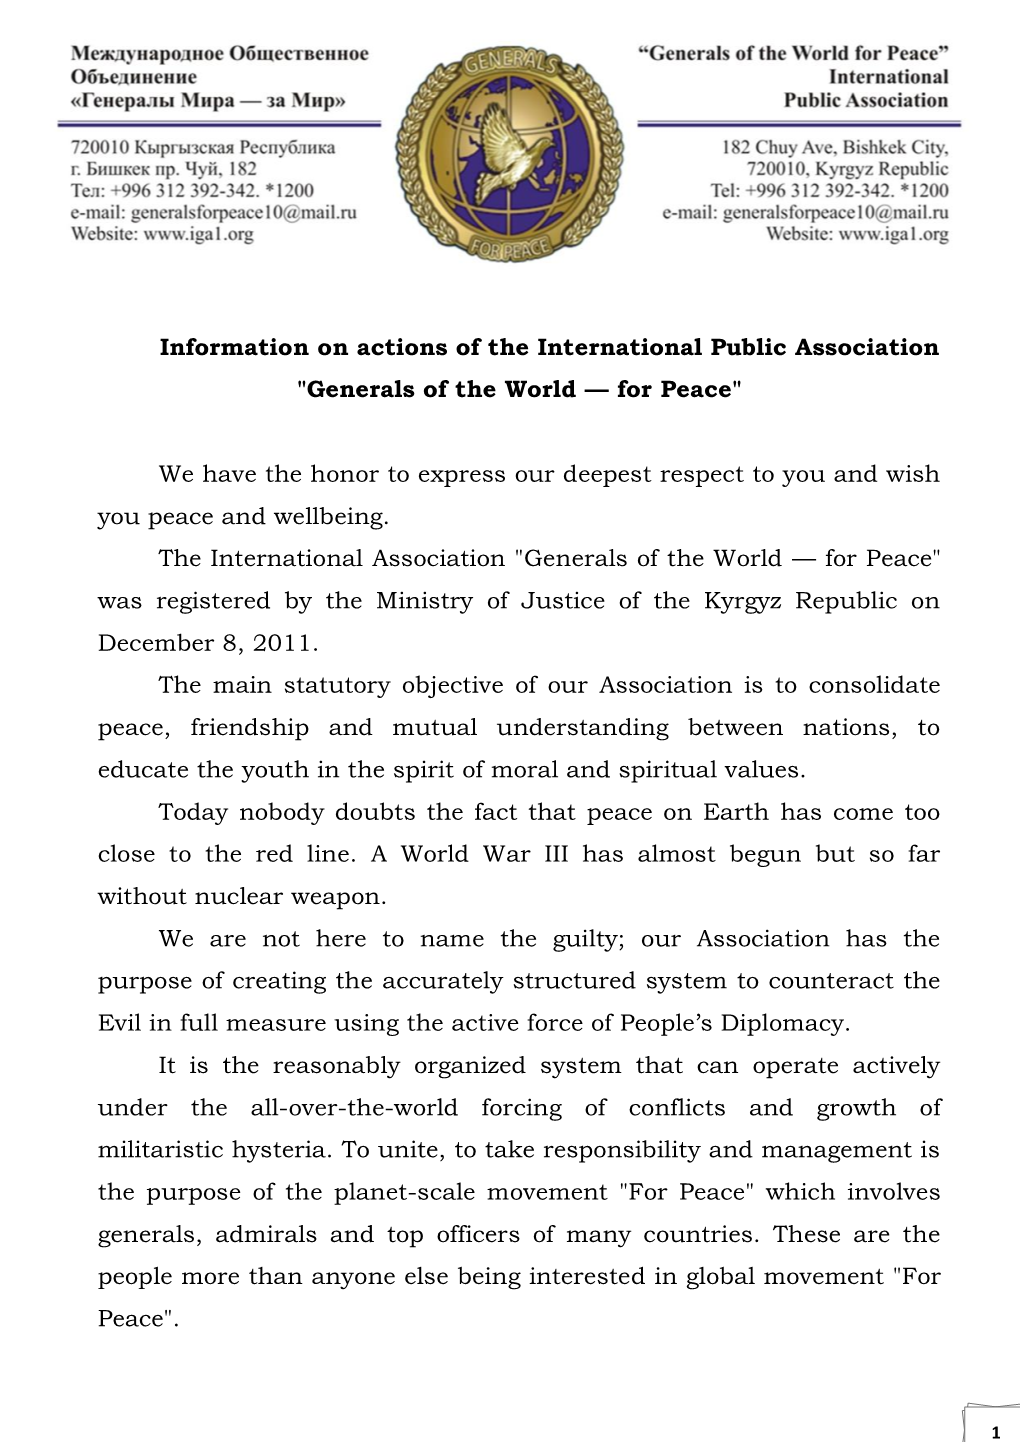 Information on Actions of the International Public Association "Generals of the World — for Peace" We Have the Honor